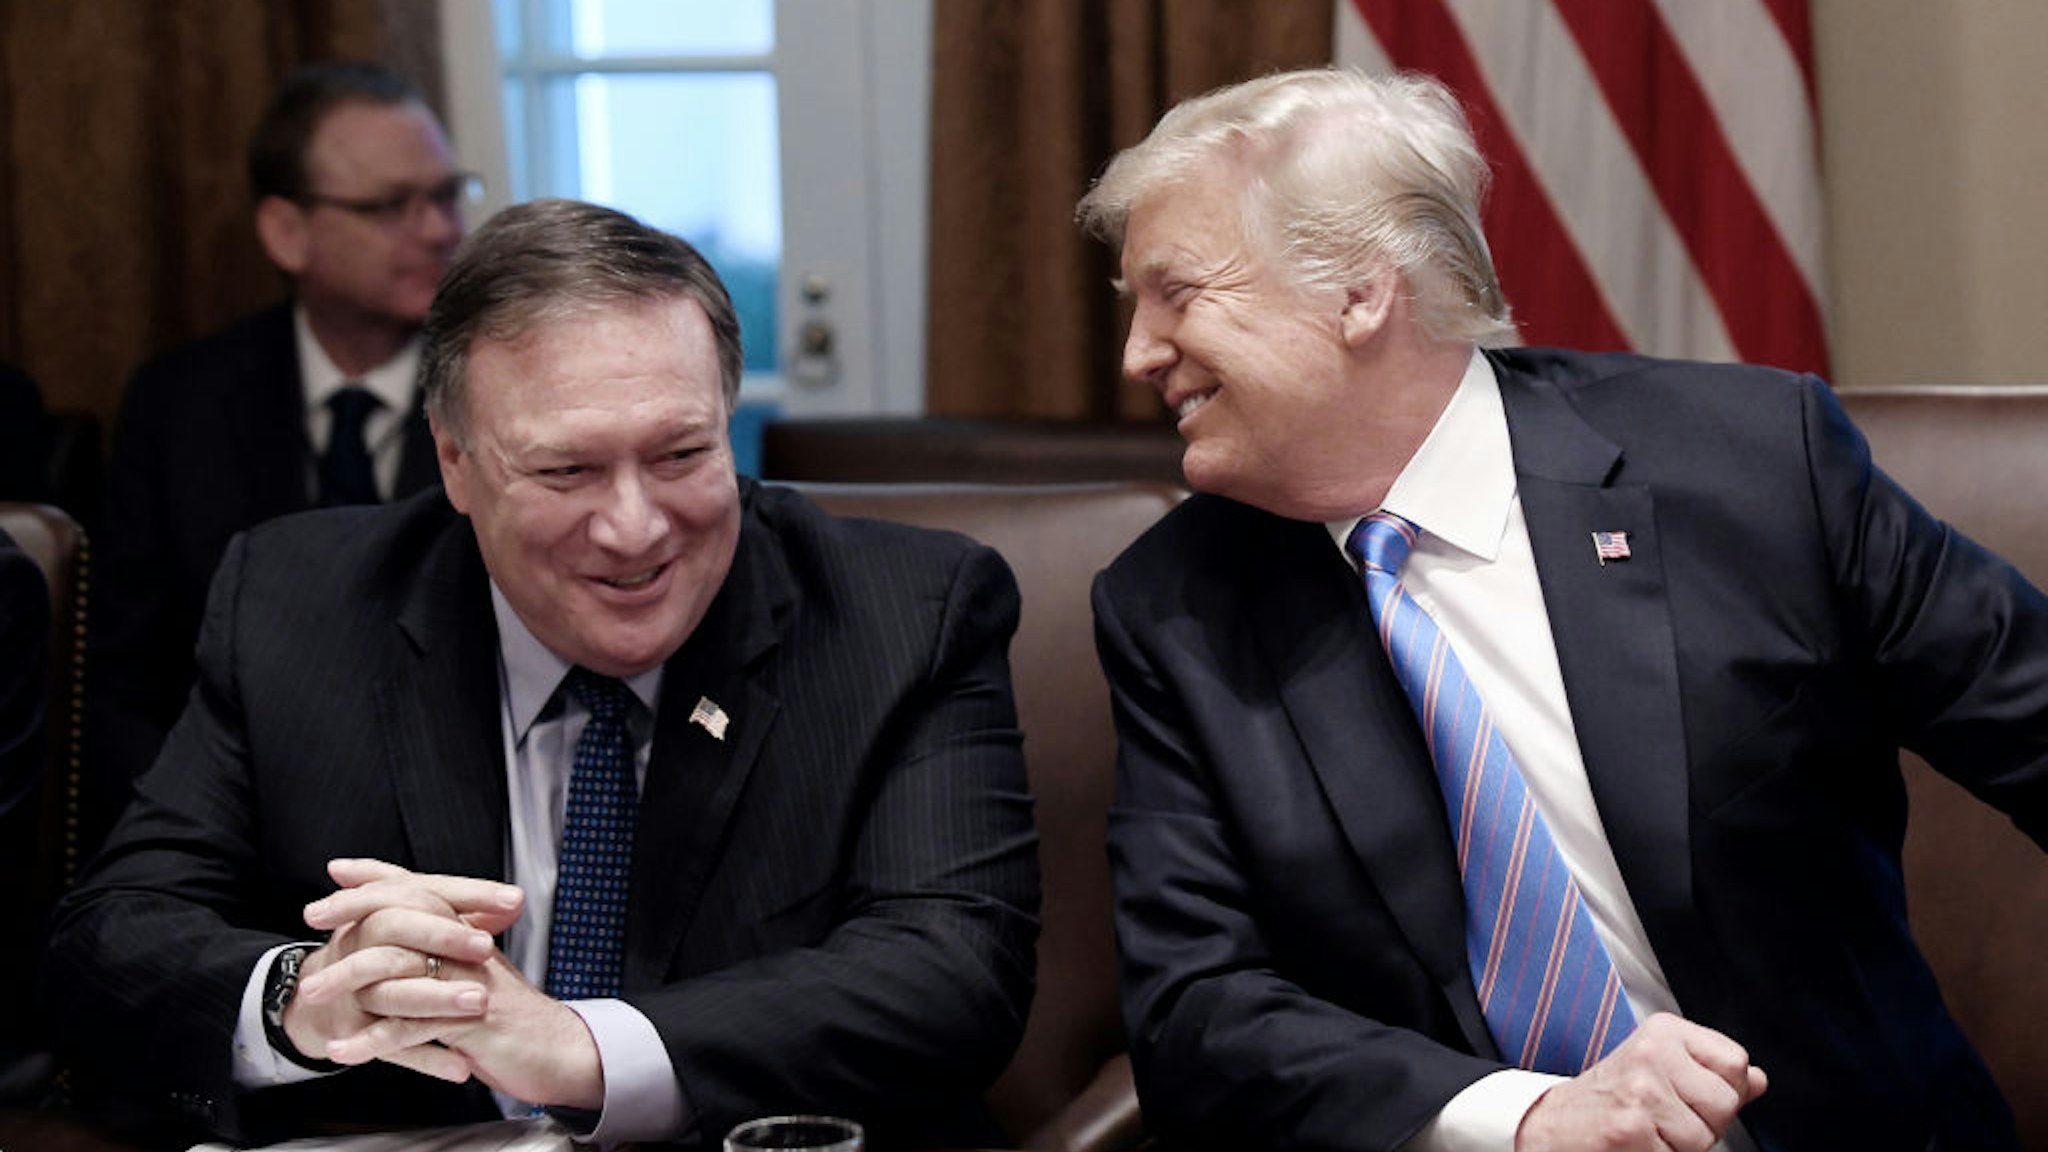 U.S. President Donald Trump, right, and Mike Pompeo, U.S. secretary of state, laugh during a meeting at the White House in Washington, D.C., U.S., on Wednesday, July 18, 2018.